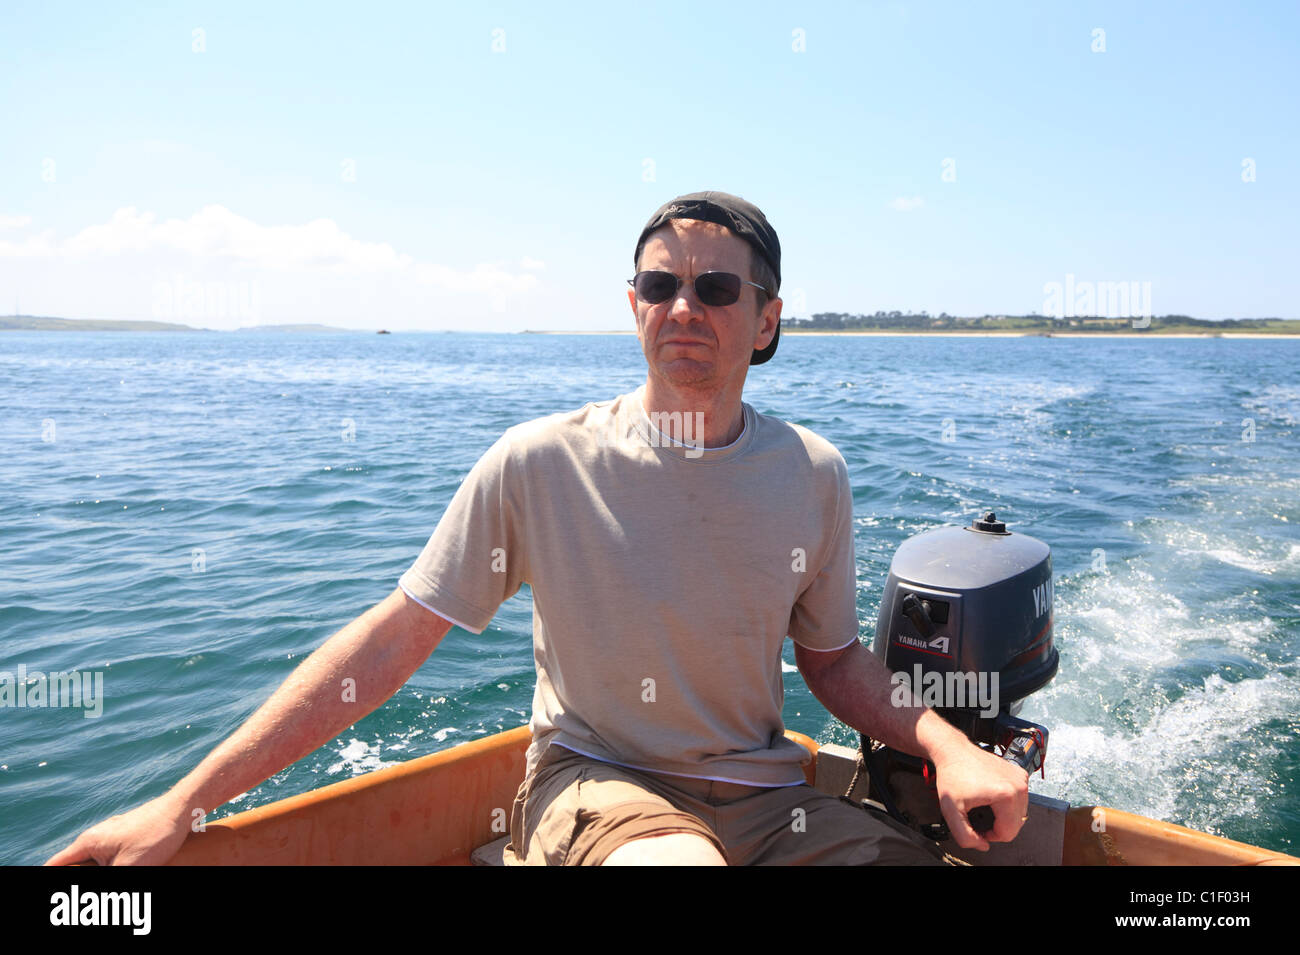 Man steering small boat from outboard motor Stock Photo